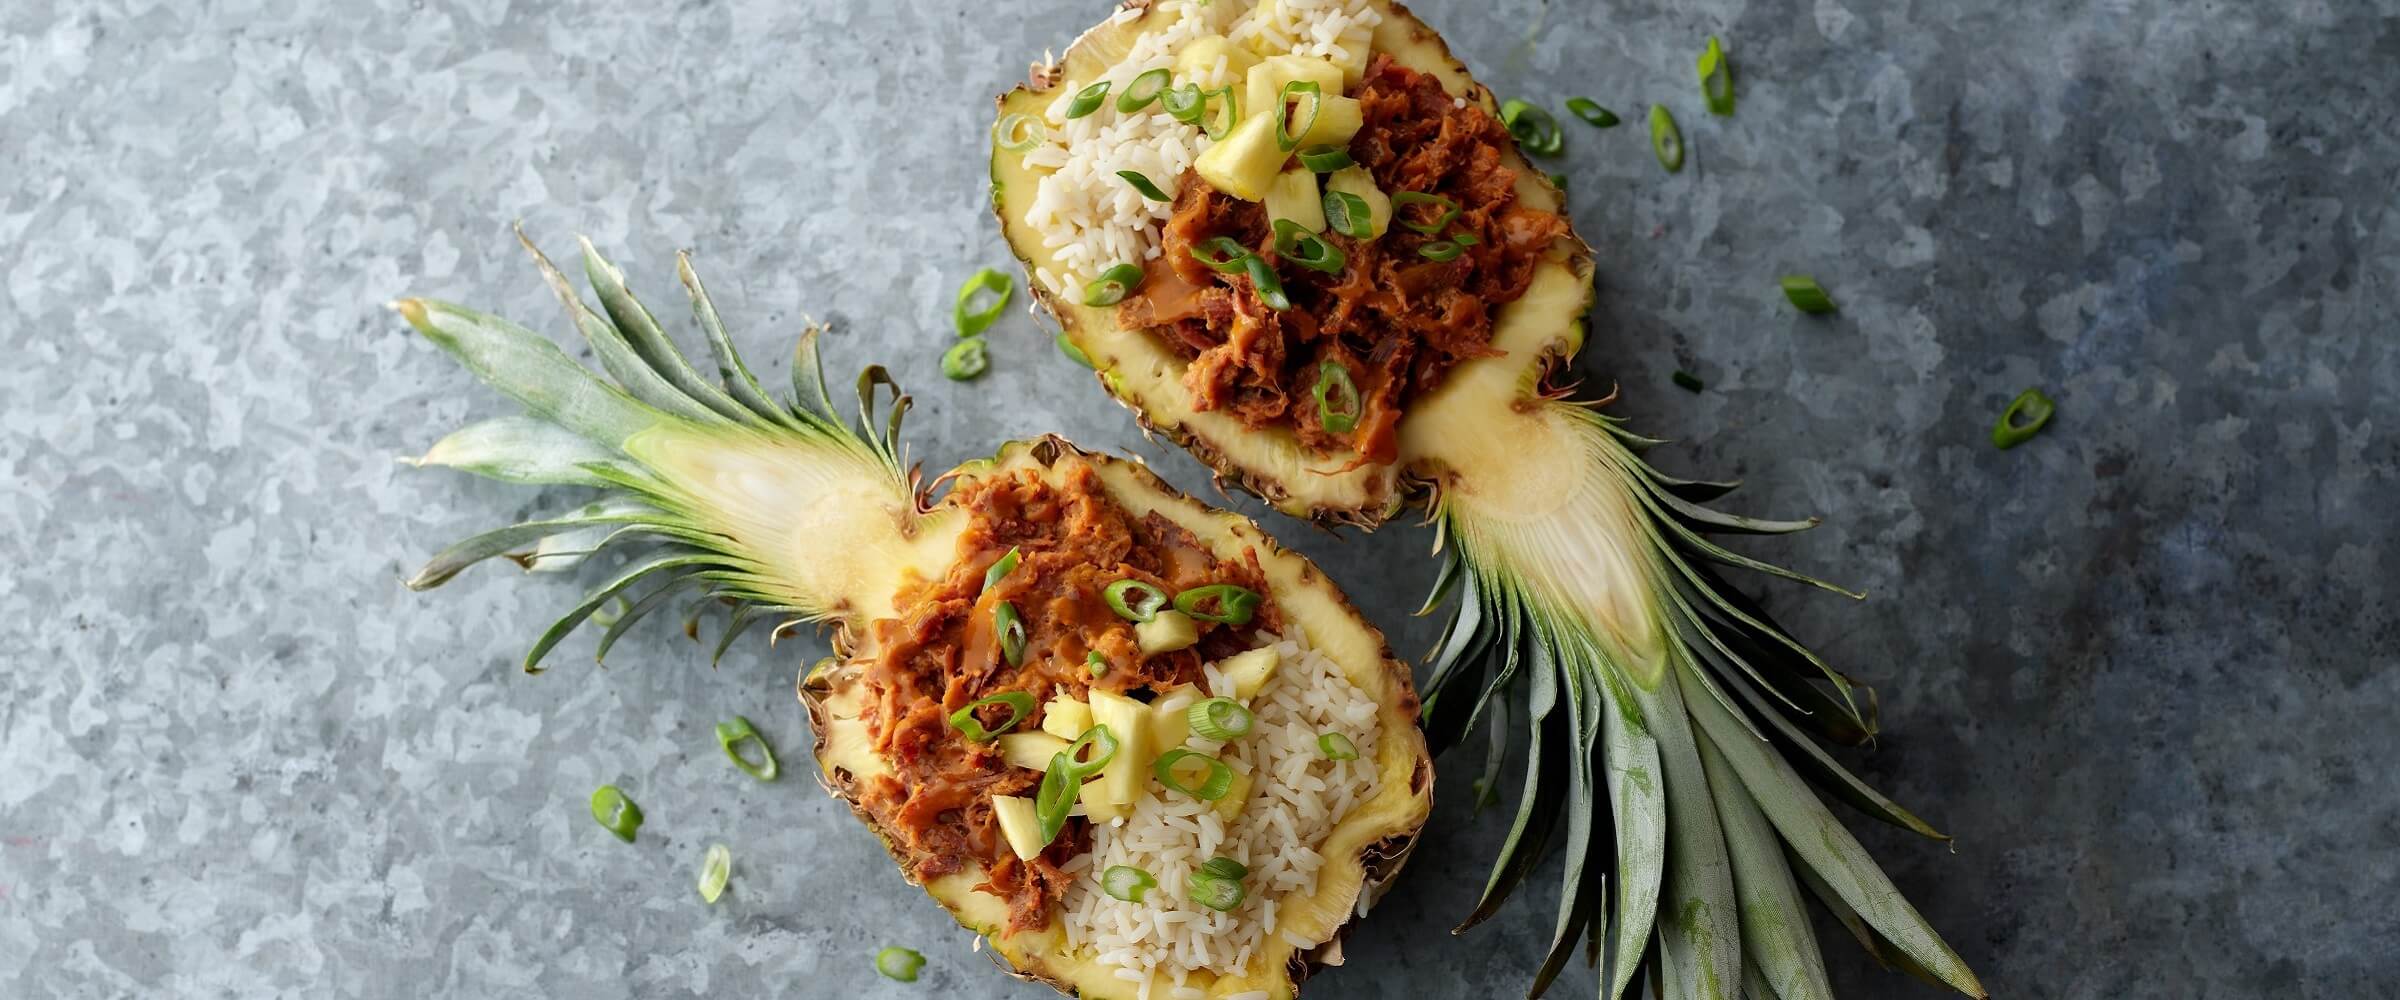 Rice Bowl in pineapple halves topped with green onions on gray platter